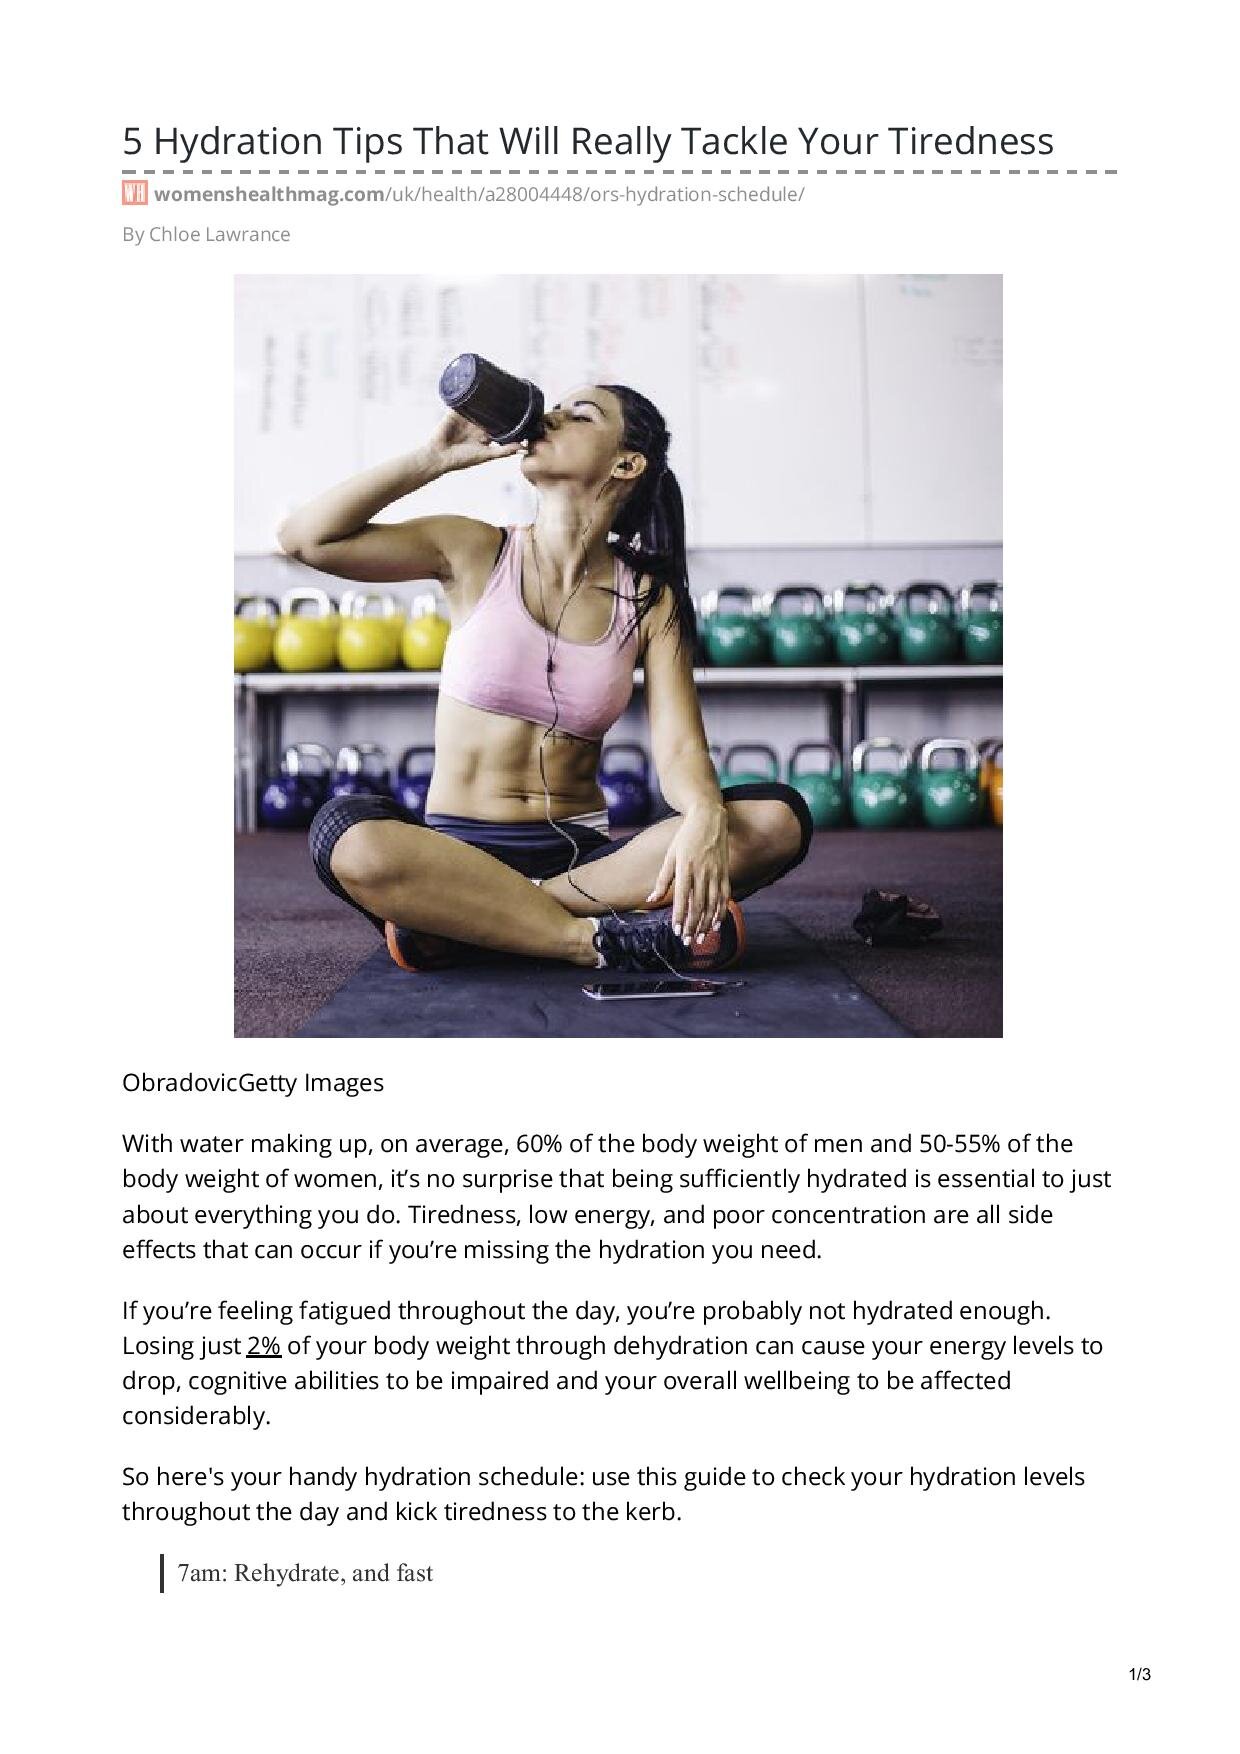 womenshealthmag.com-5 Hydration Tips That Will Really Tackle Your Tiredness-page-001.jpg